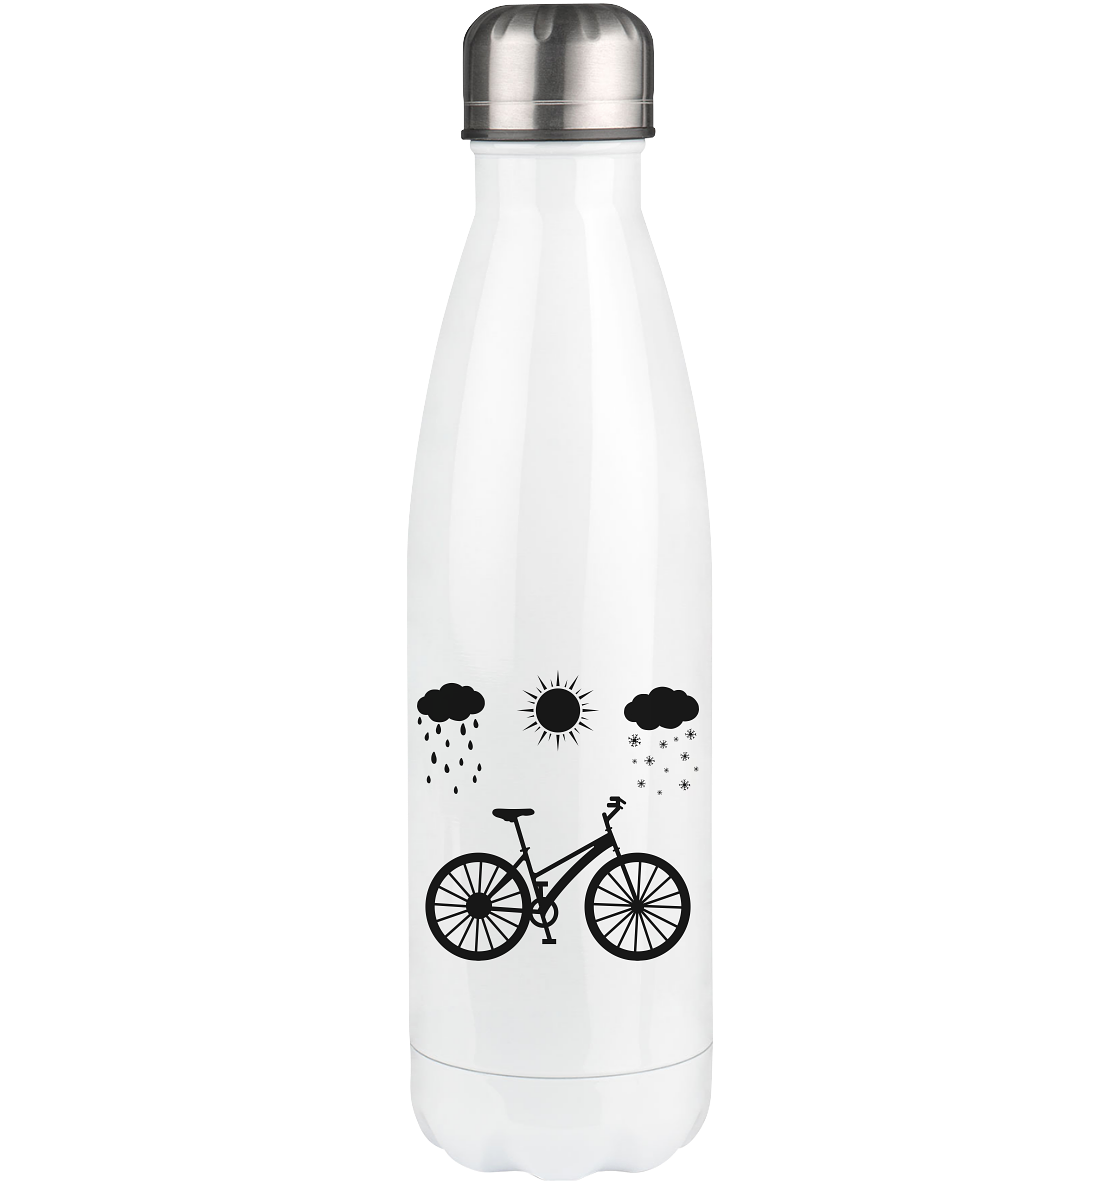 All Seasons and Bicycle - Edelstahl Thermosflasche fahrrad 500ml